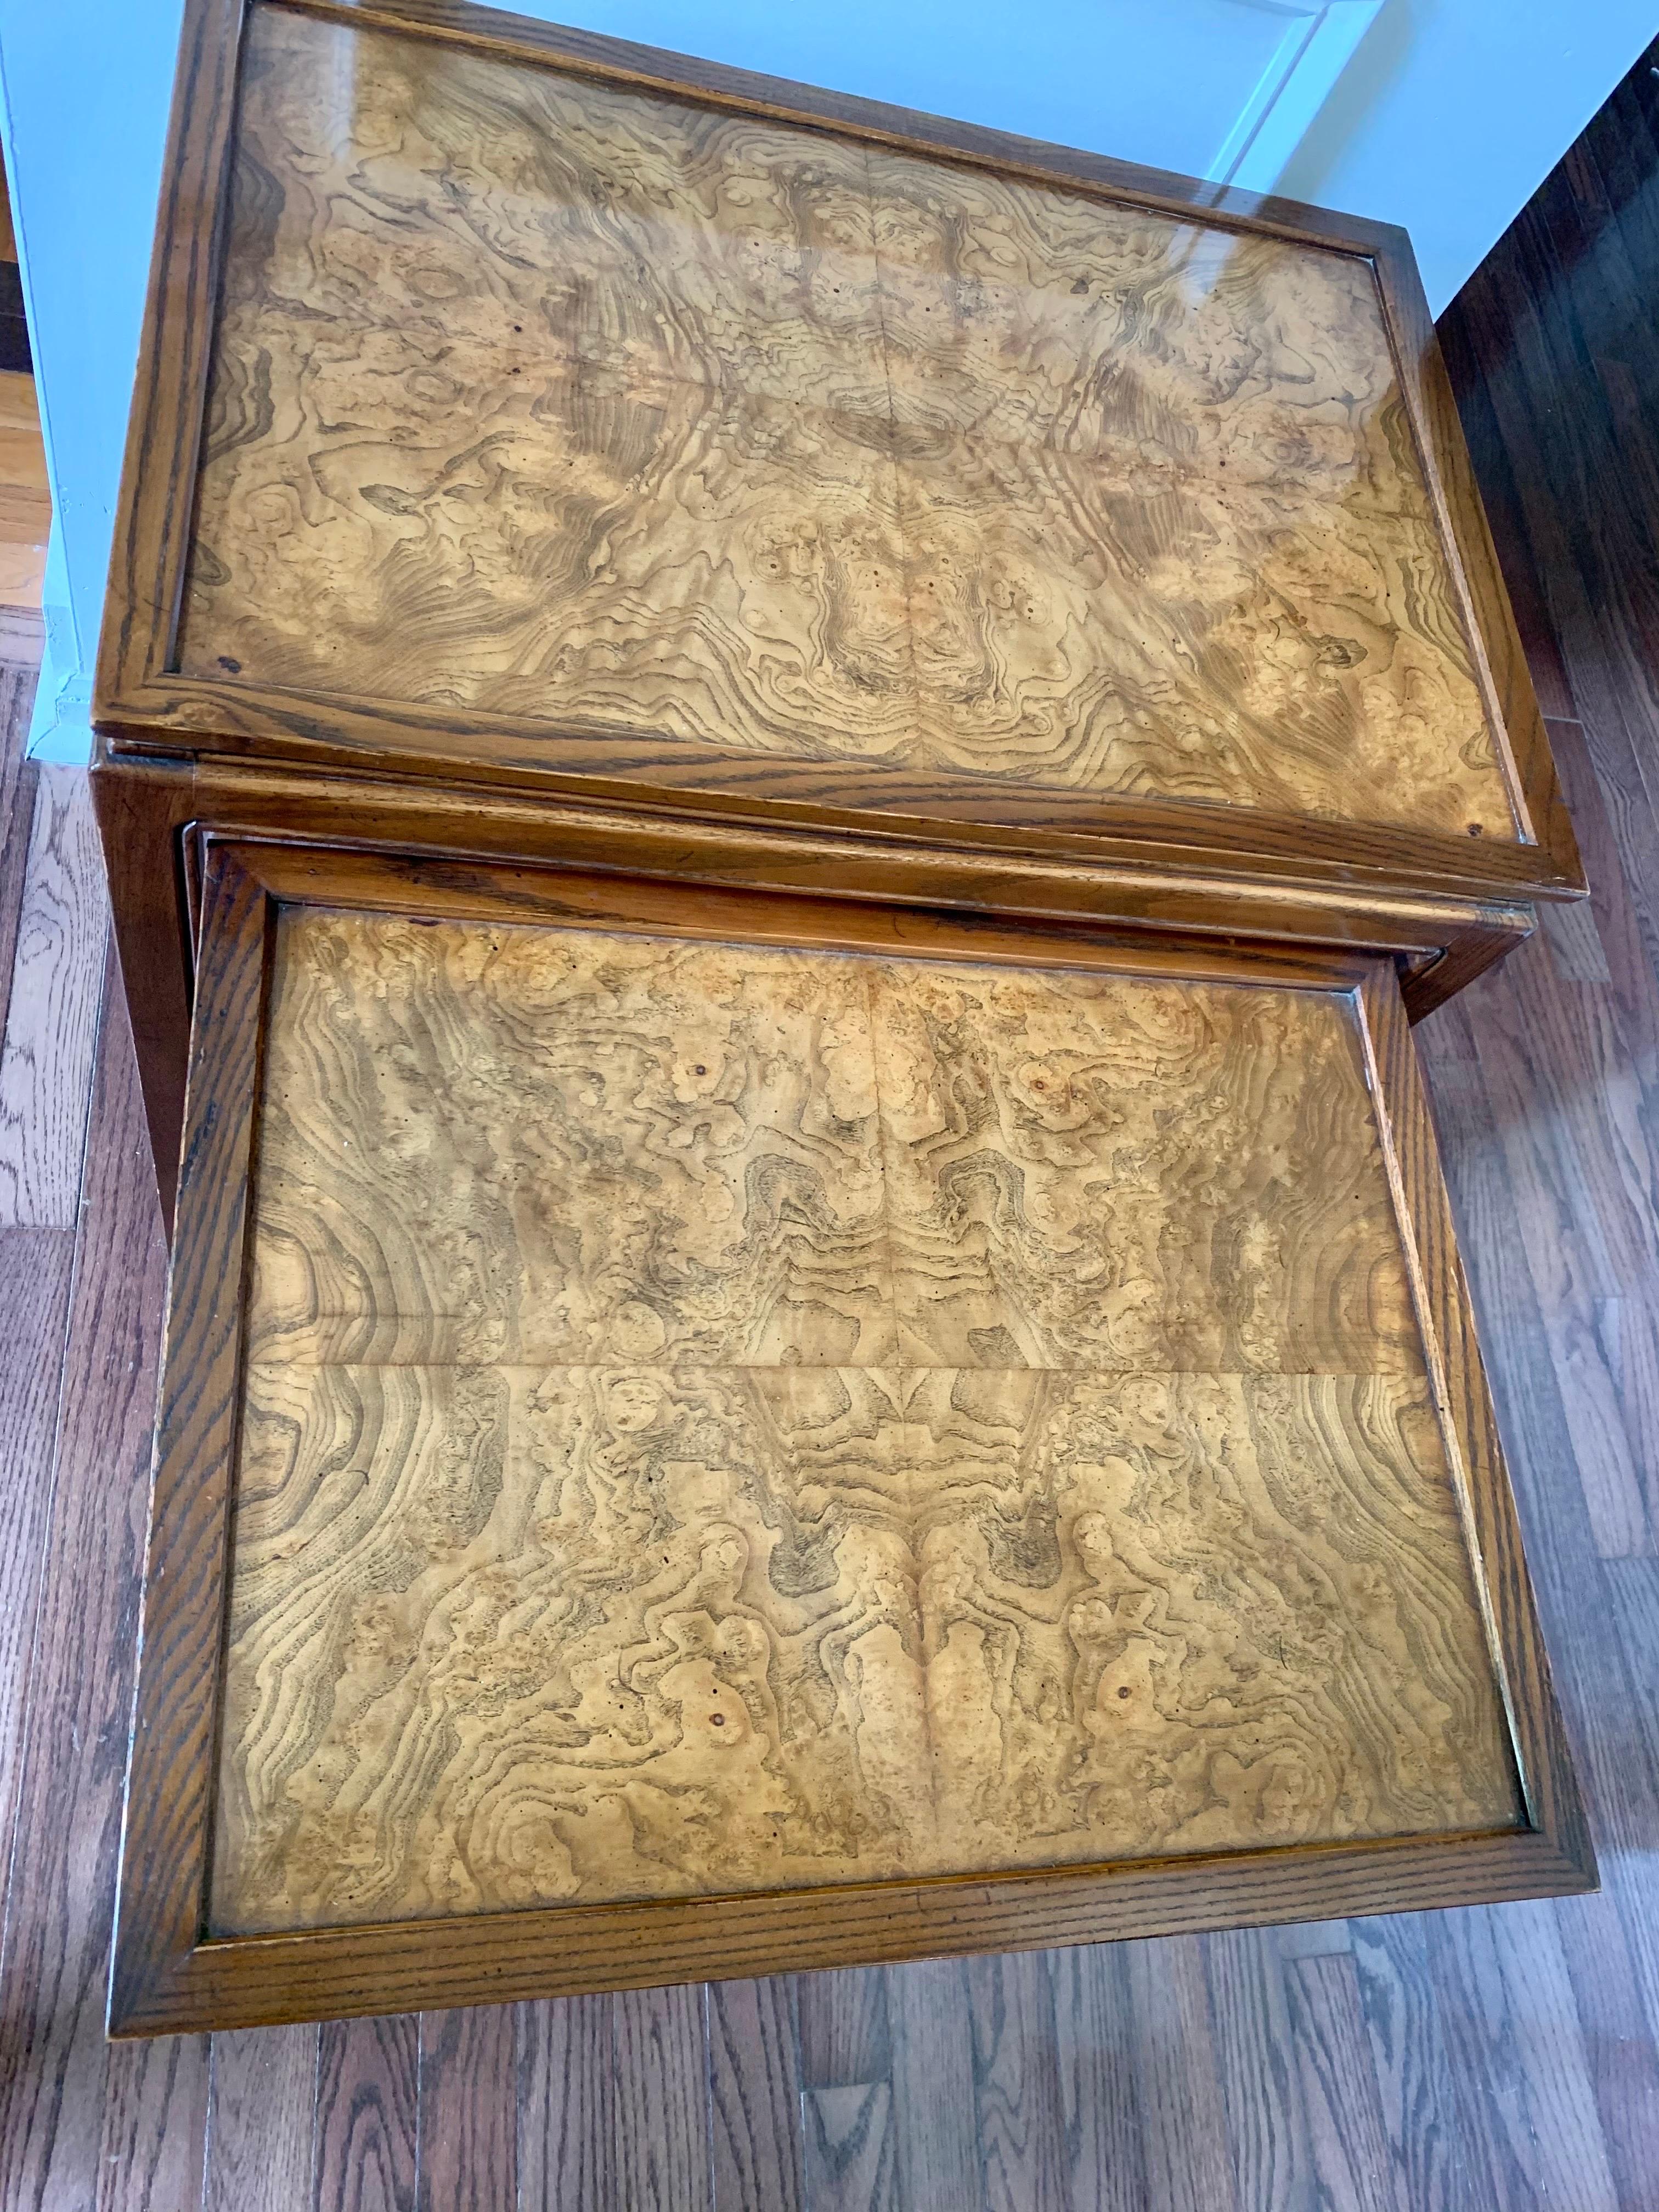 American Classical 1980s Knob Creek Burl Wood Nesting Tables For Sale